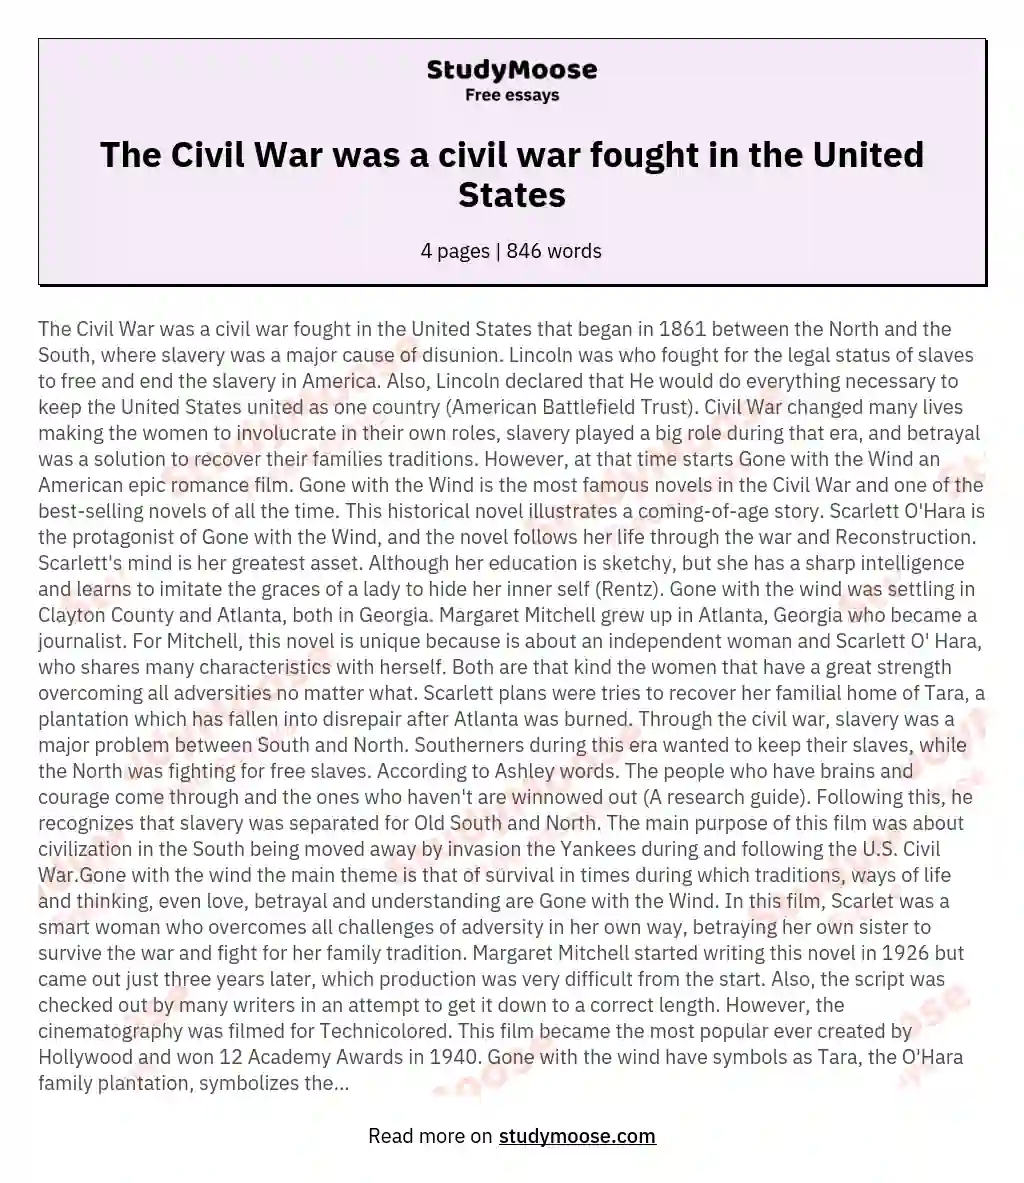 The Civil War was a civil war fought in the United States